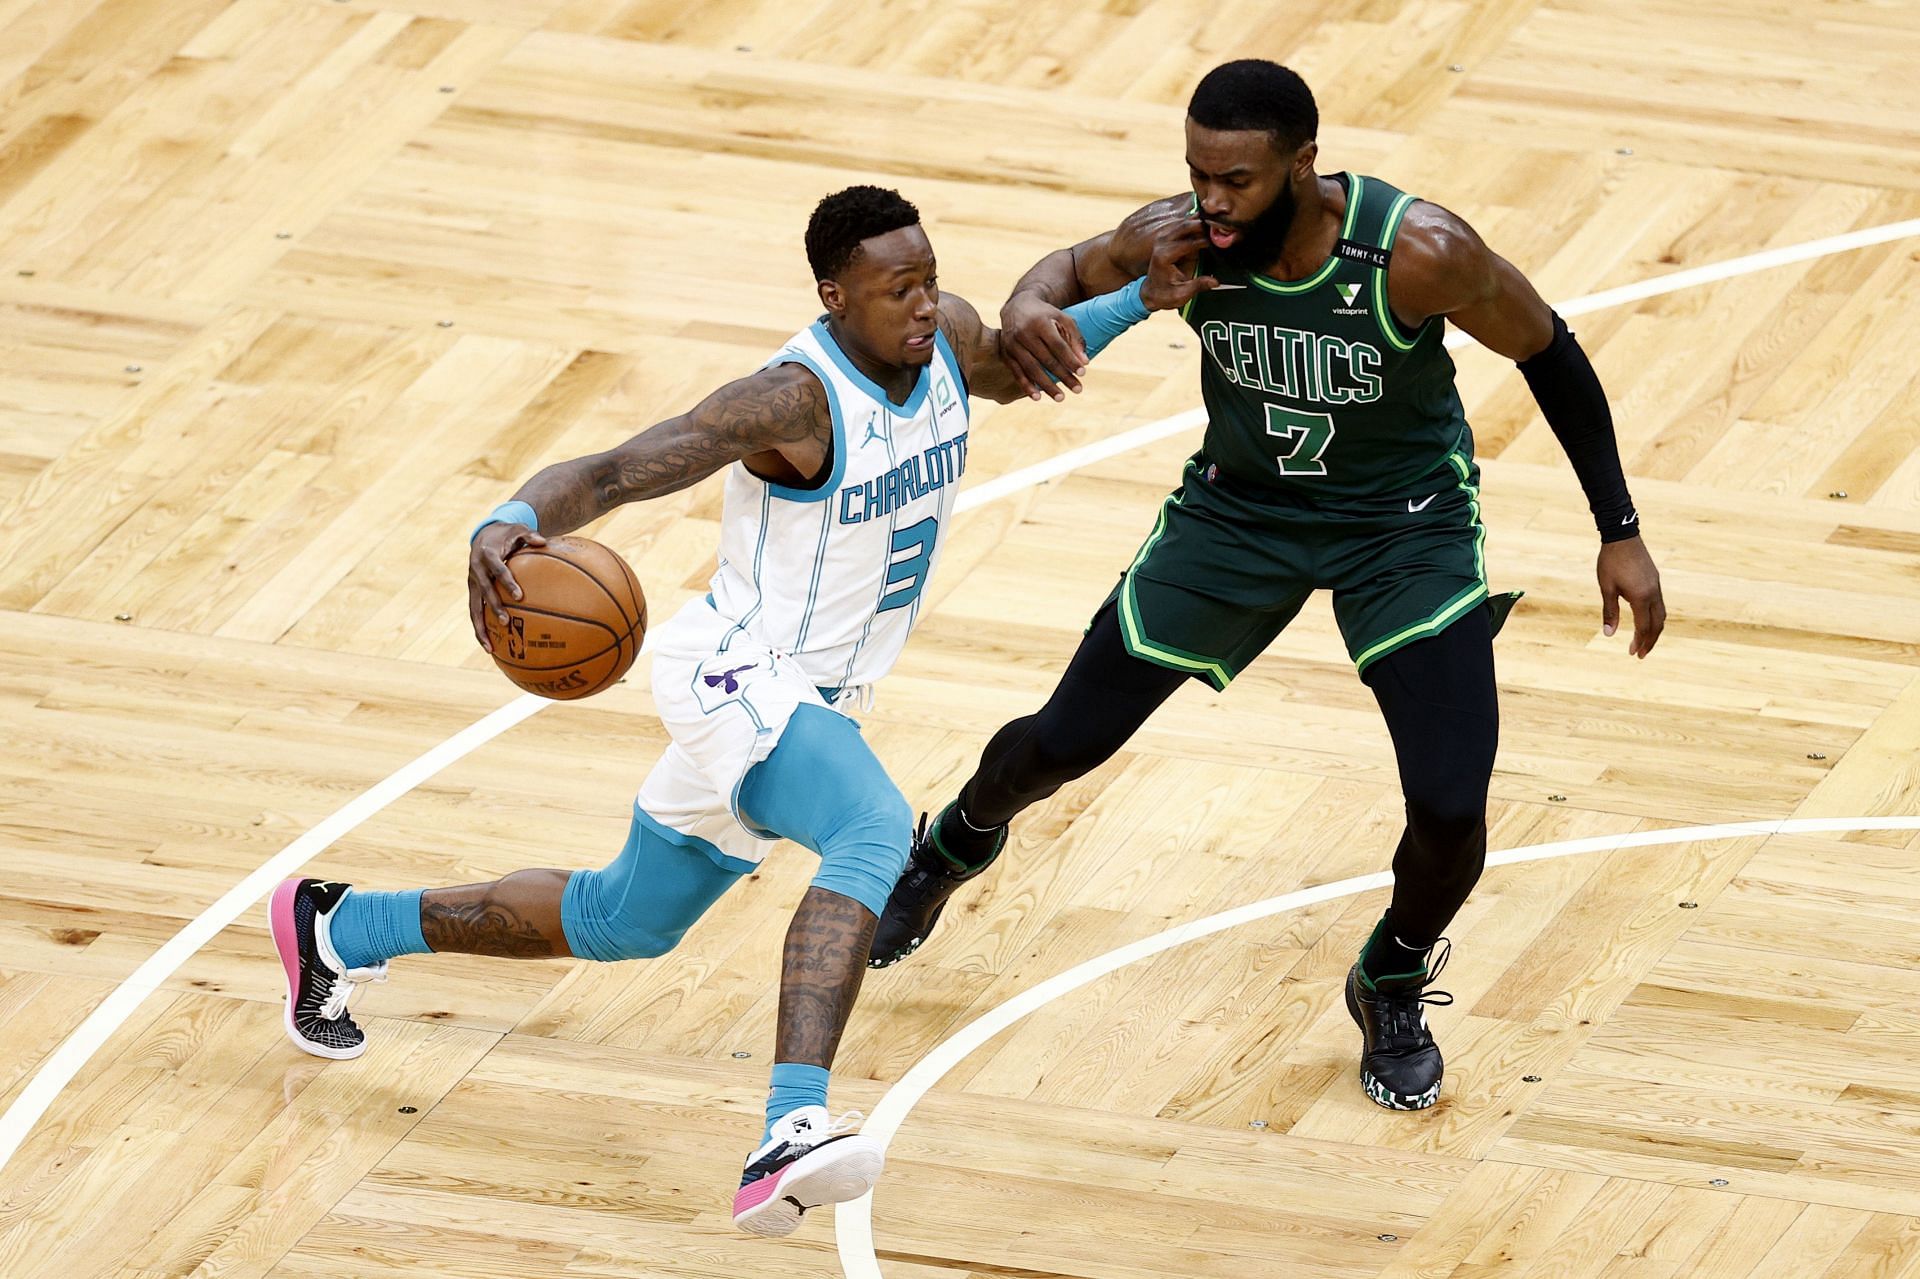 The Charlotte Hornets and the Boston Celtics will face off at Spectrum Center on Monday